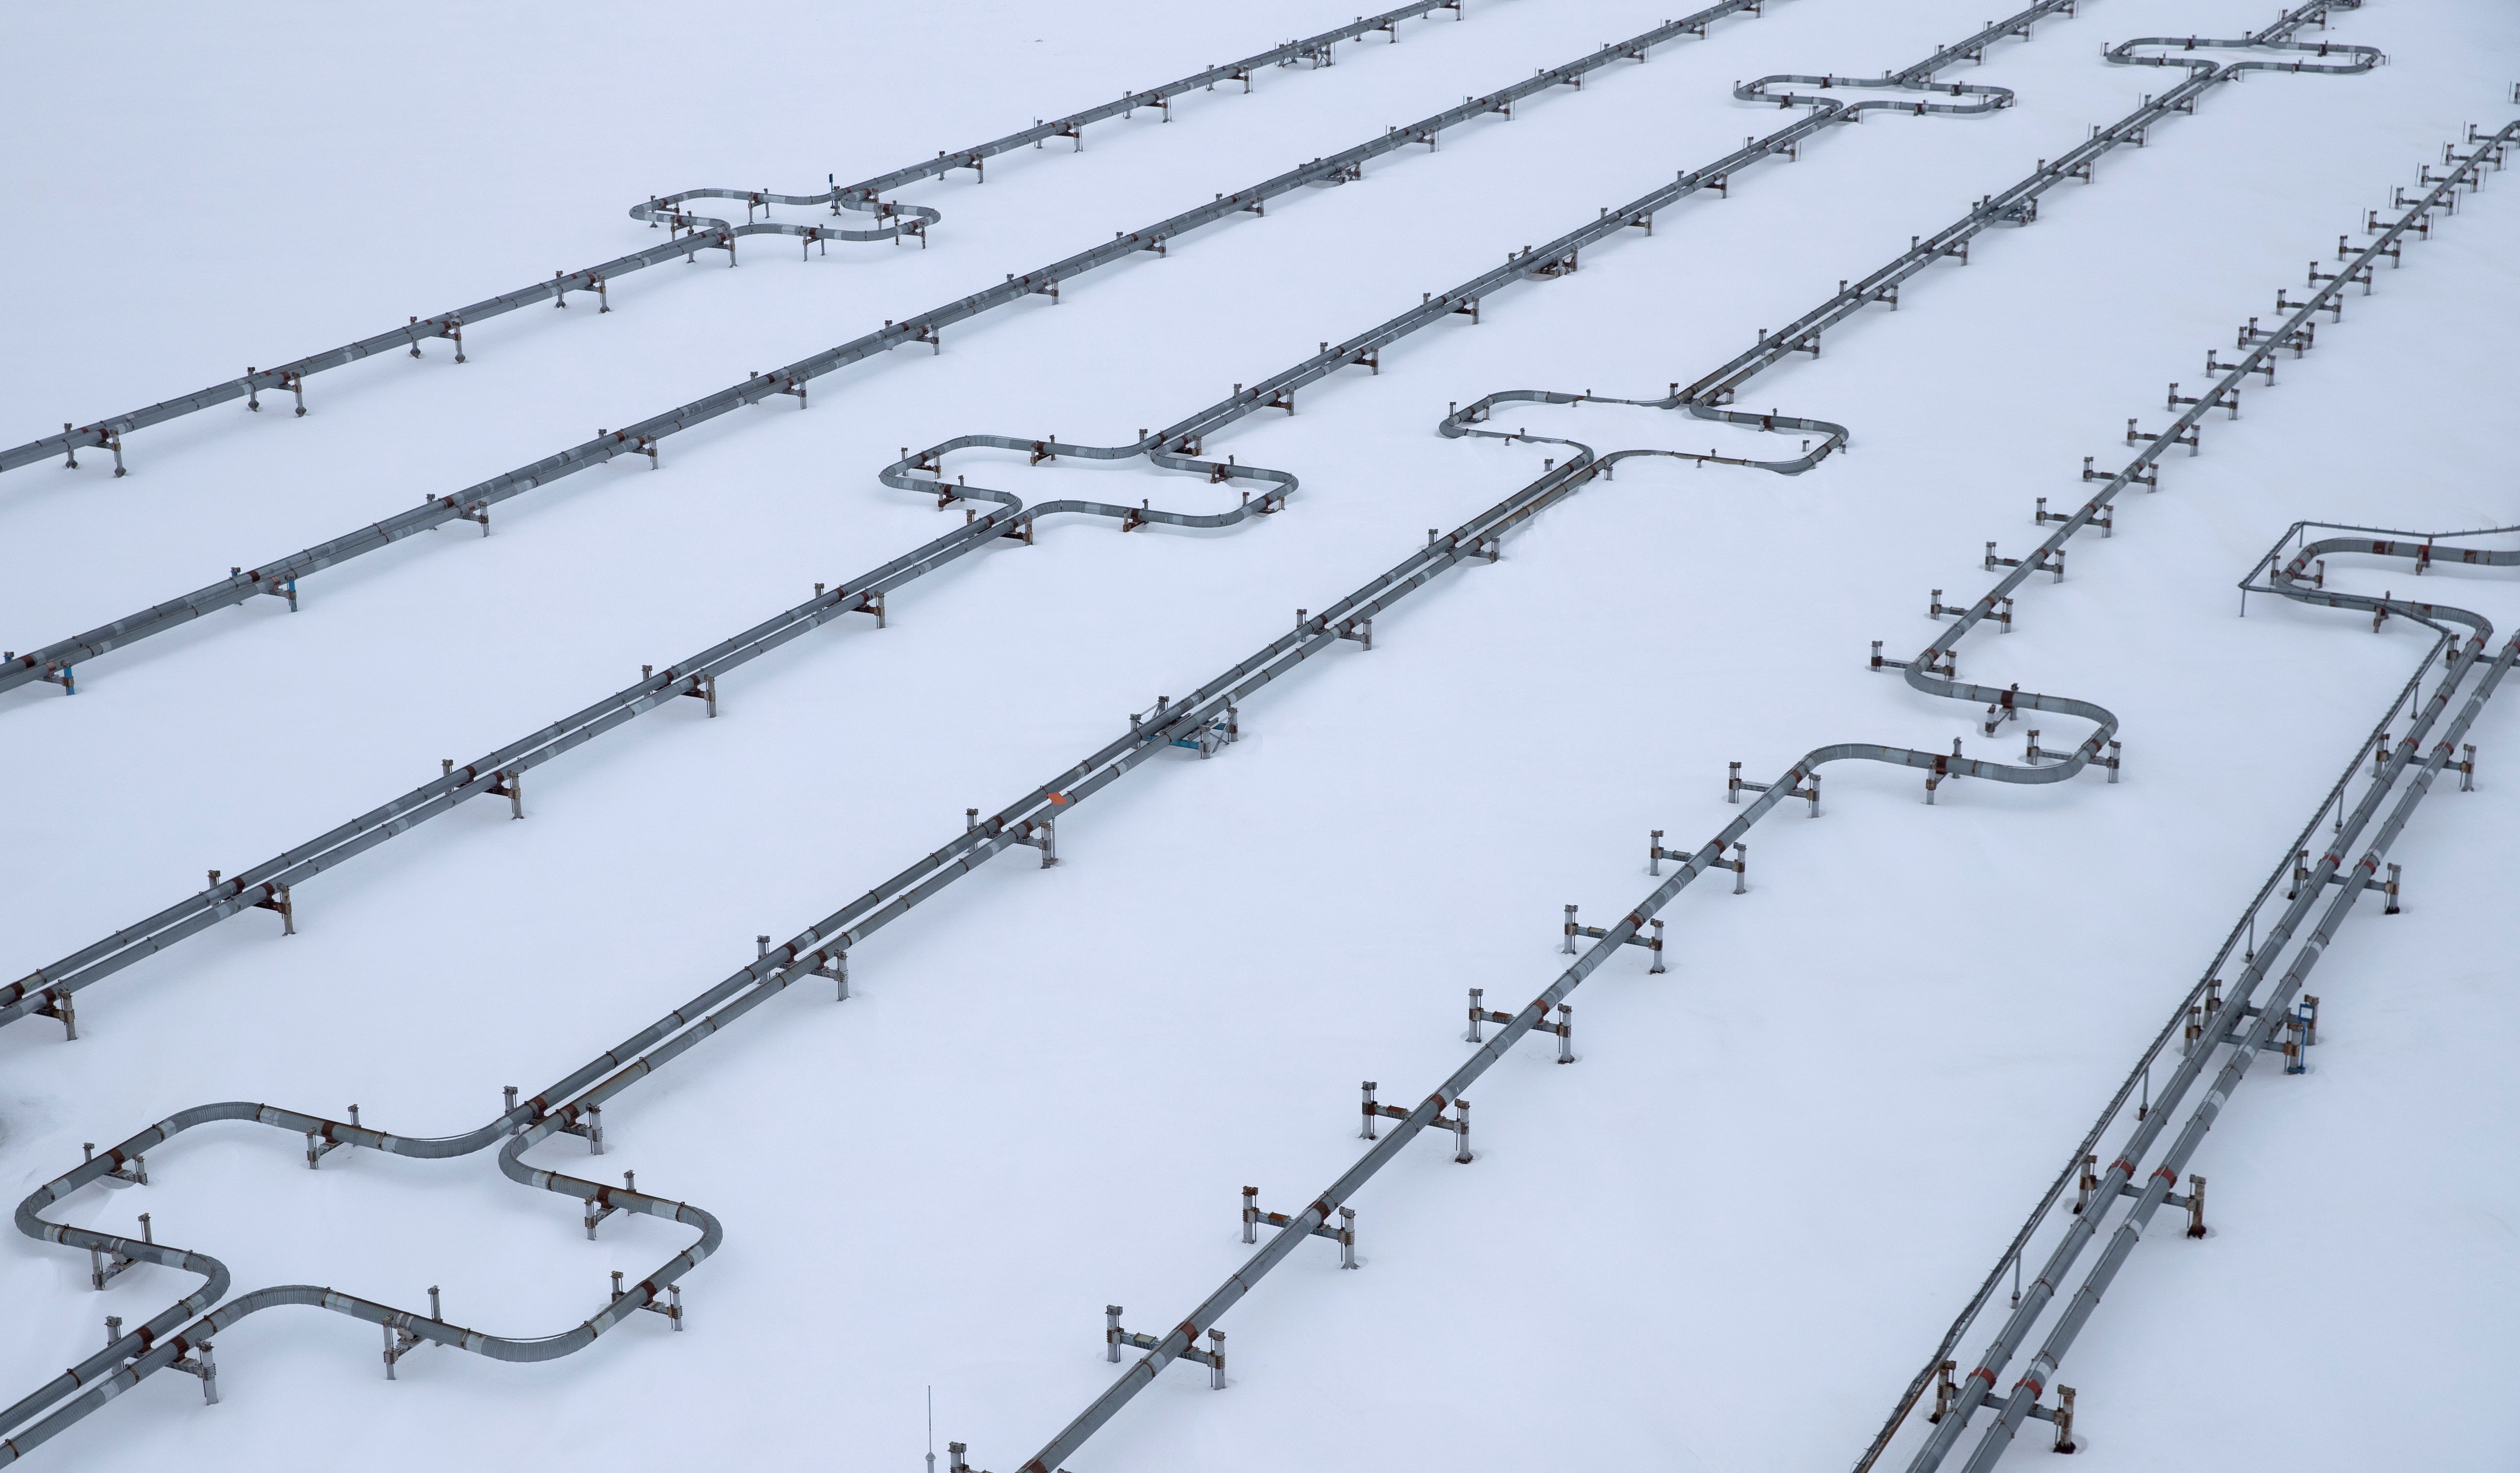 A view shows pipelines at a gas processing facility, operated by Gazprom company, at Bovanenkovo gas field on the Arctic Yamal peninsula, Russia May 21, 2019. Picture taken May 21, 2019. REUTERS/Maxim Shemetov